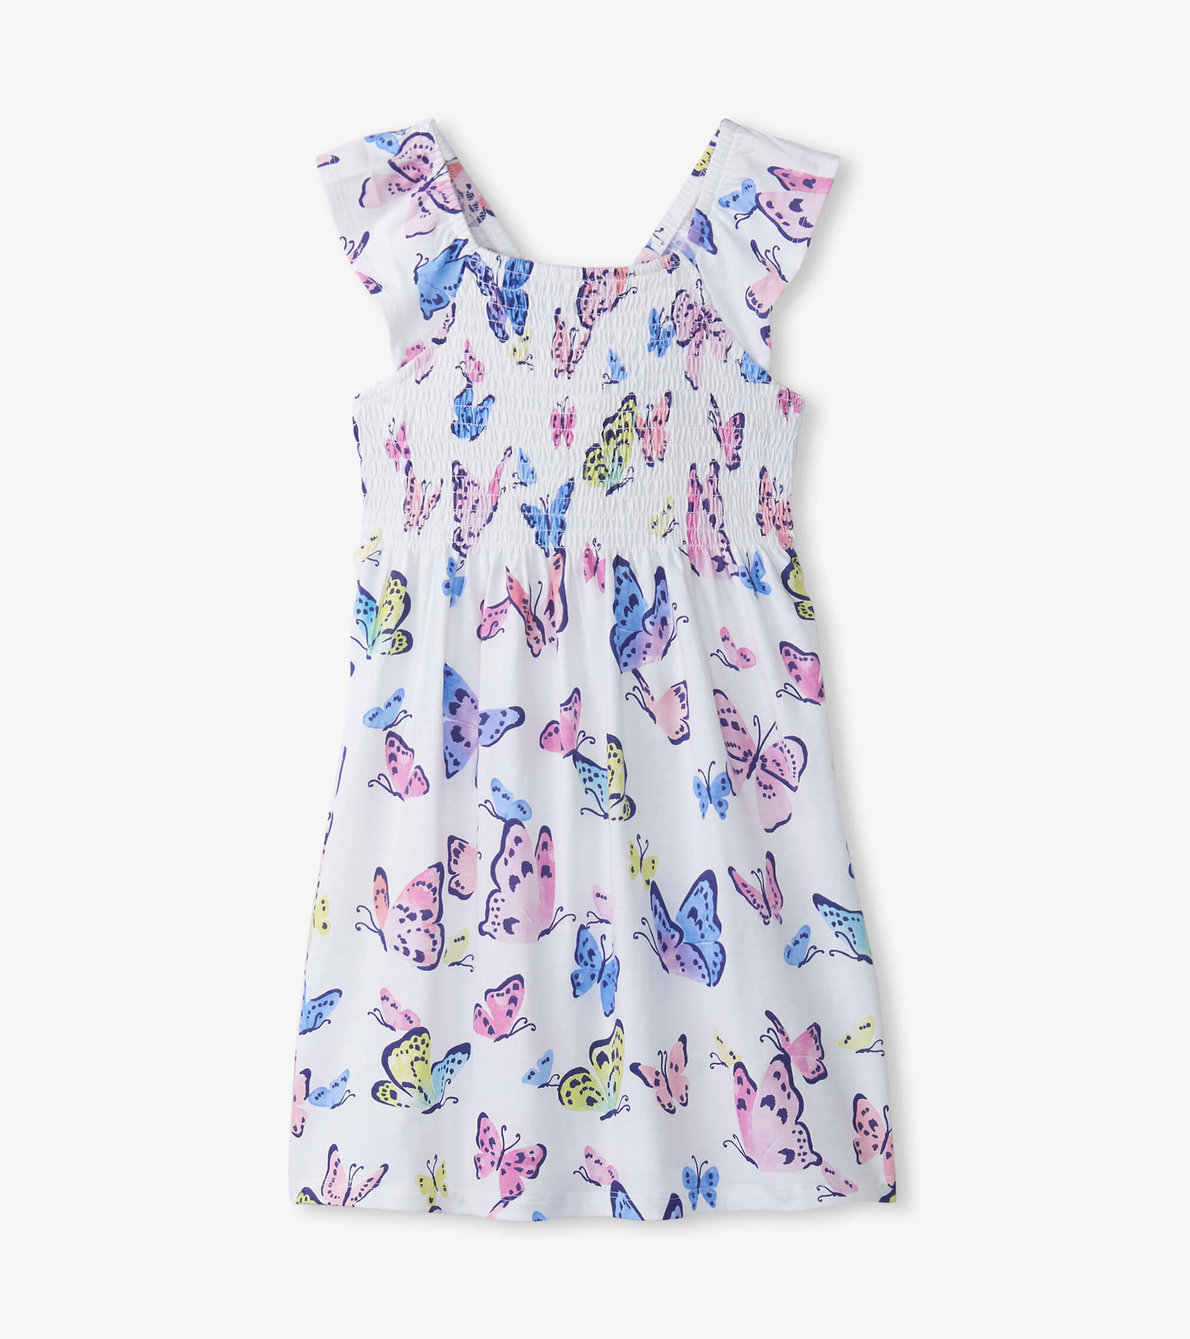 View larger image of Girls Soft Butterflies Smocked Dress